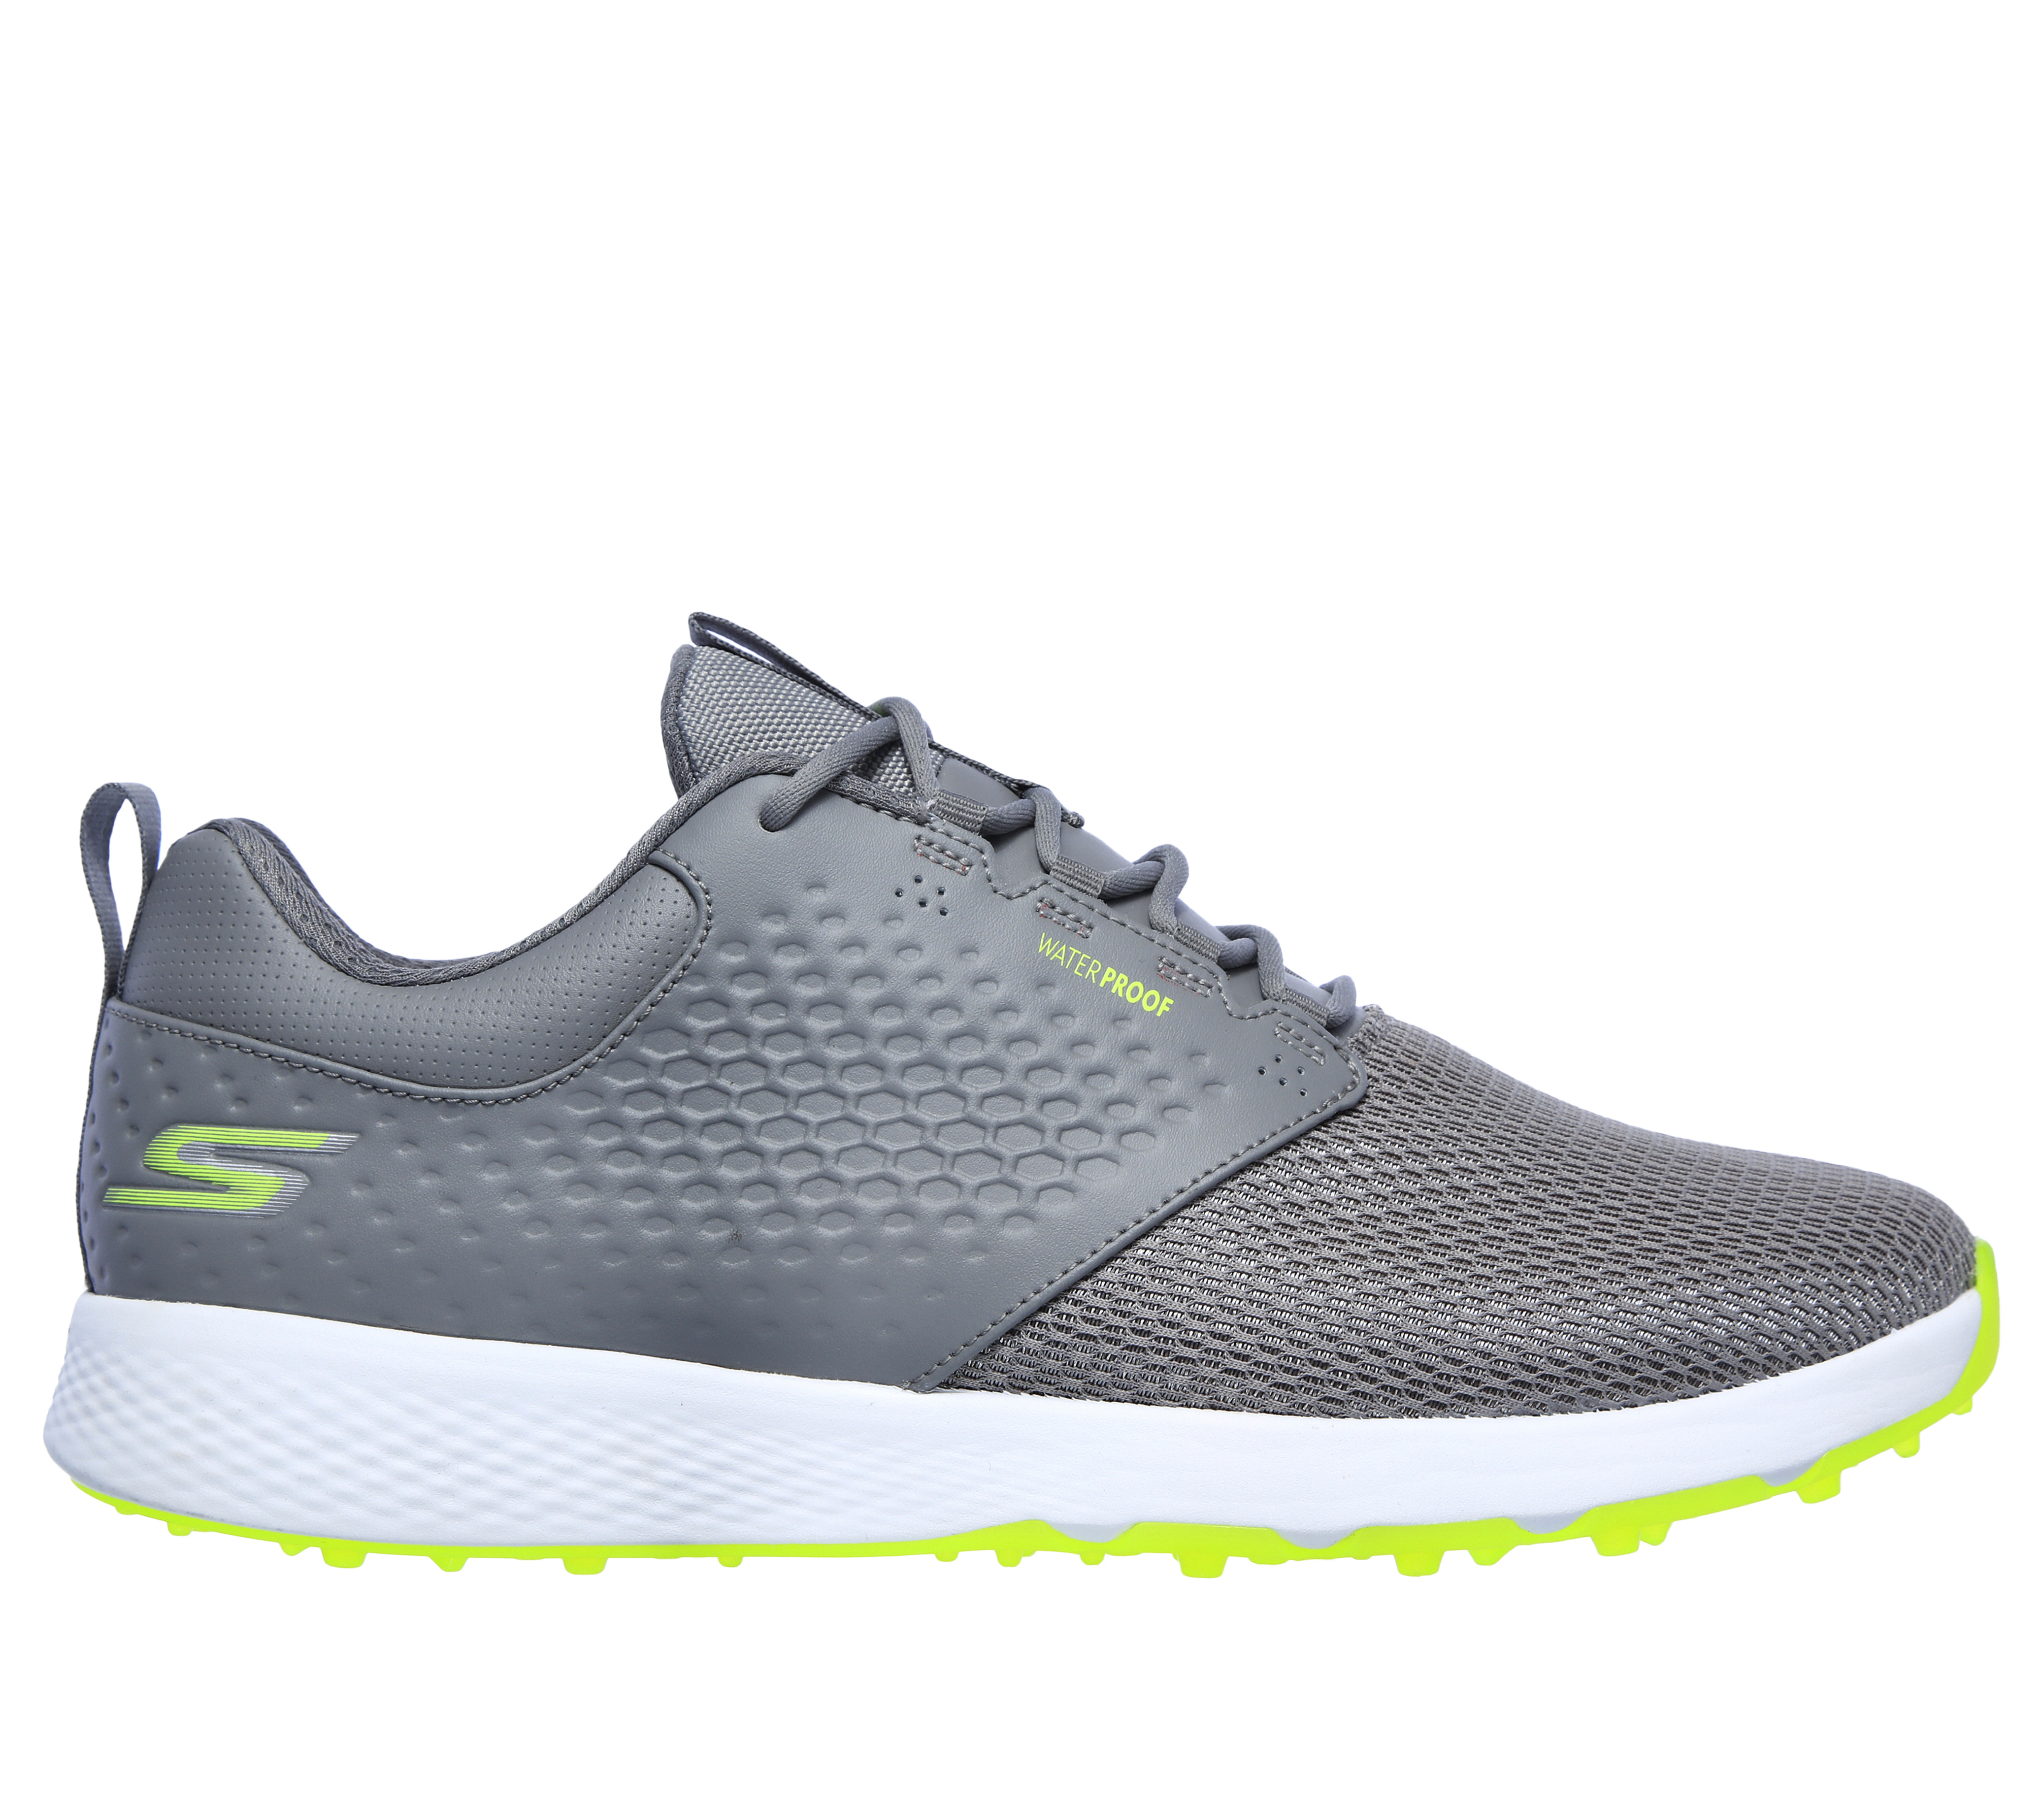 skechers golf shoes with memory foam